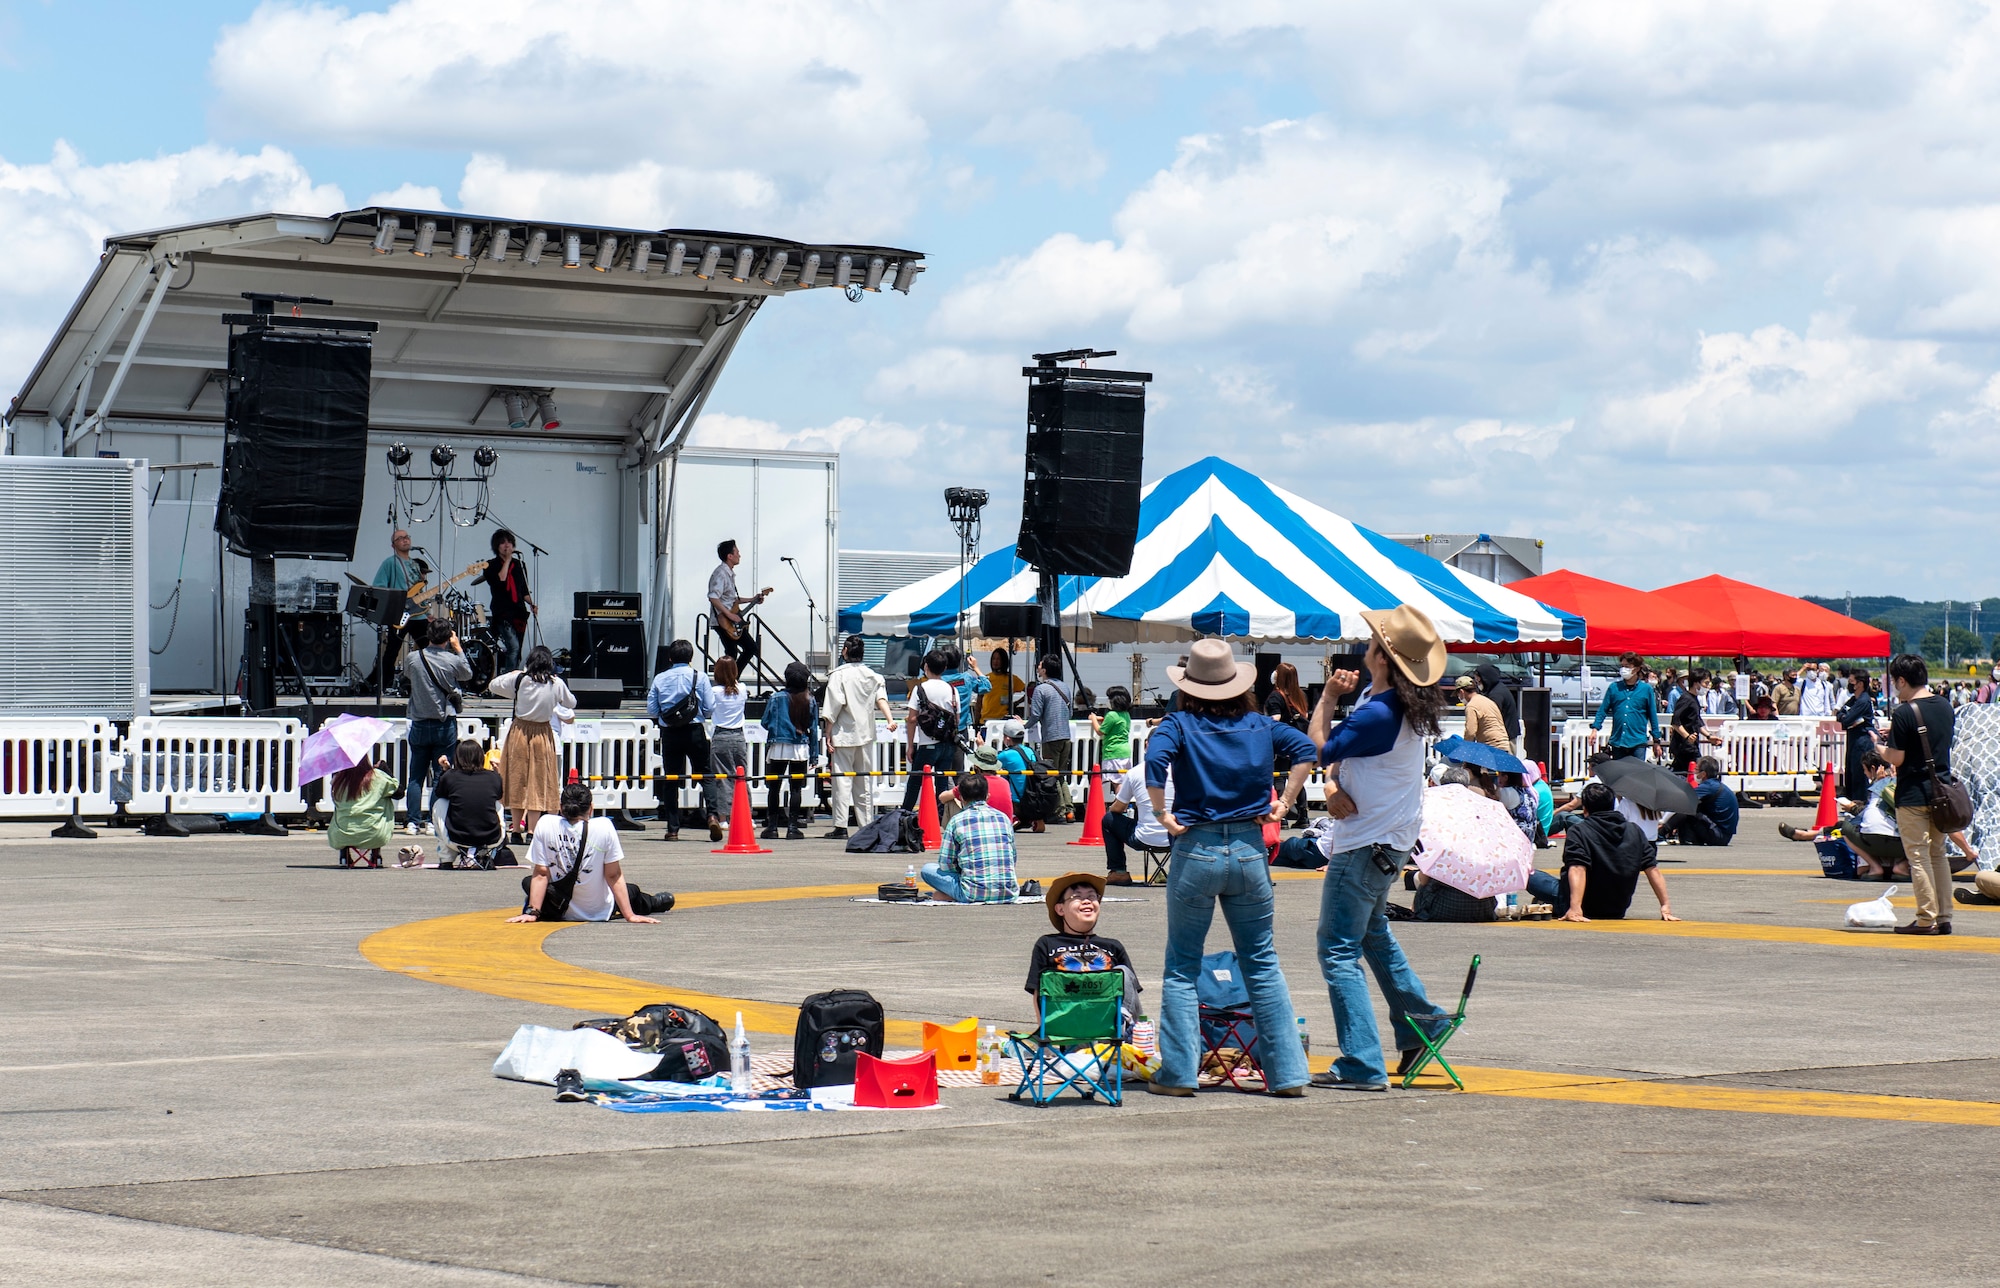 Attendees jam out during Friendship Festival 2022, at Yokota Air Base, Japan May 22, 2022. The two-day festival was an opportunity for visitors to learn more about the U.S. and Japan bilateral partnership, while strengthening the bonds between Yokota and the local communities. Yokota was able to host the event with the support of Japan Self-Defense Force, sister services and the local community. (U.S. Air Force photo by Senior Airman Hannah Bean)